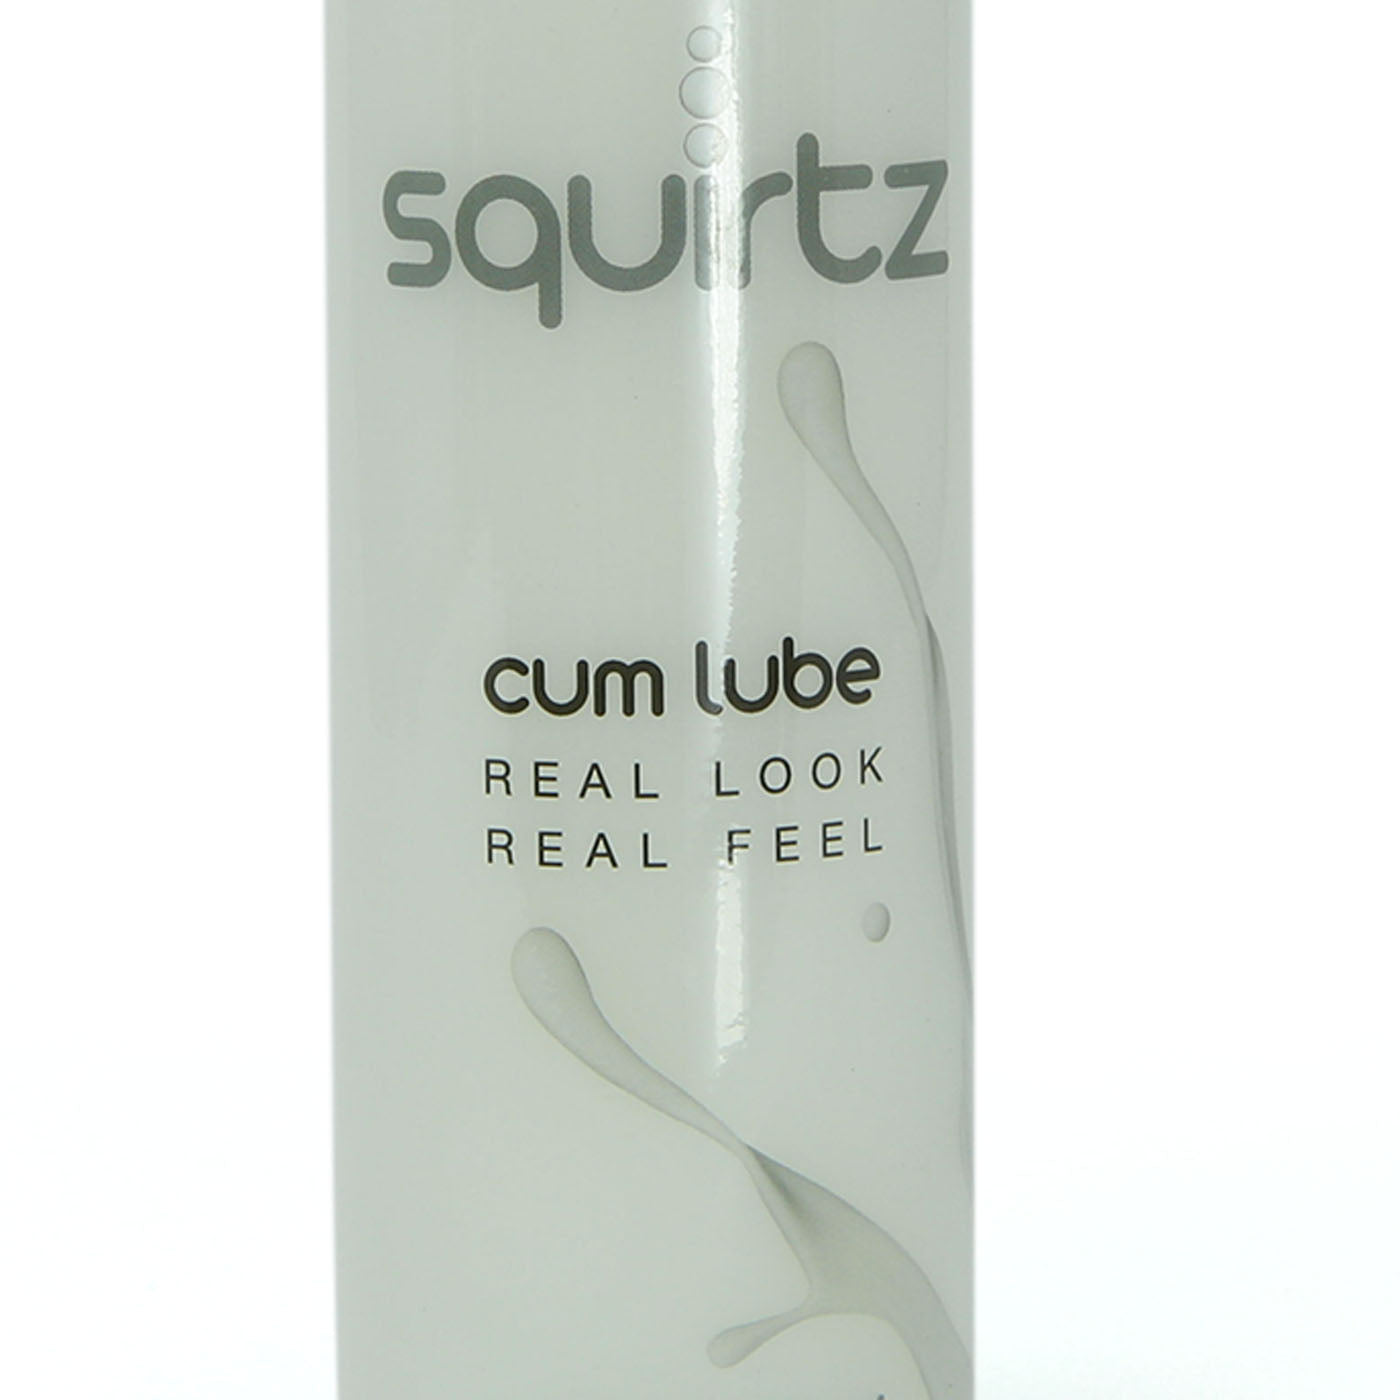 Squirtz Cum Lube Water-based Unscented 6.3 Fl Oz Lubricant